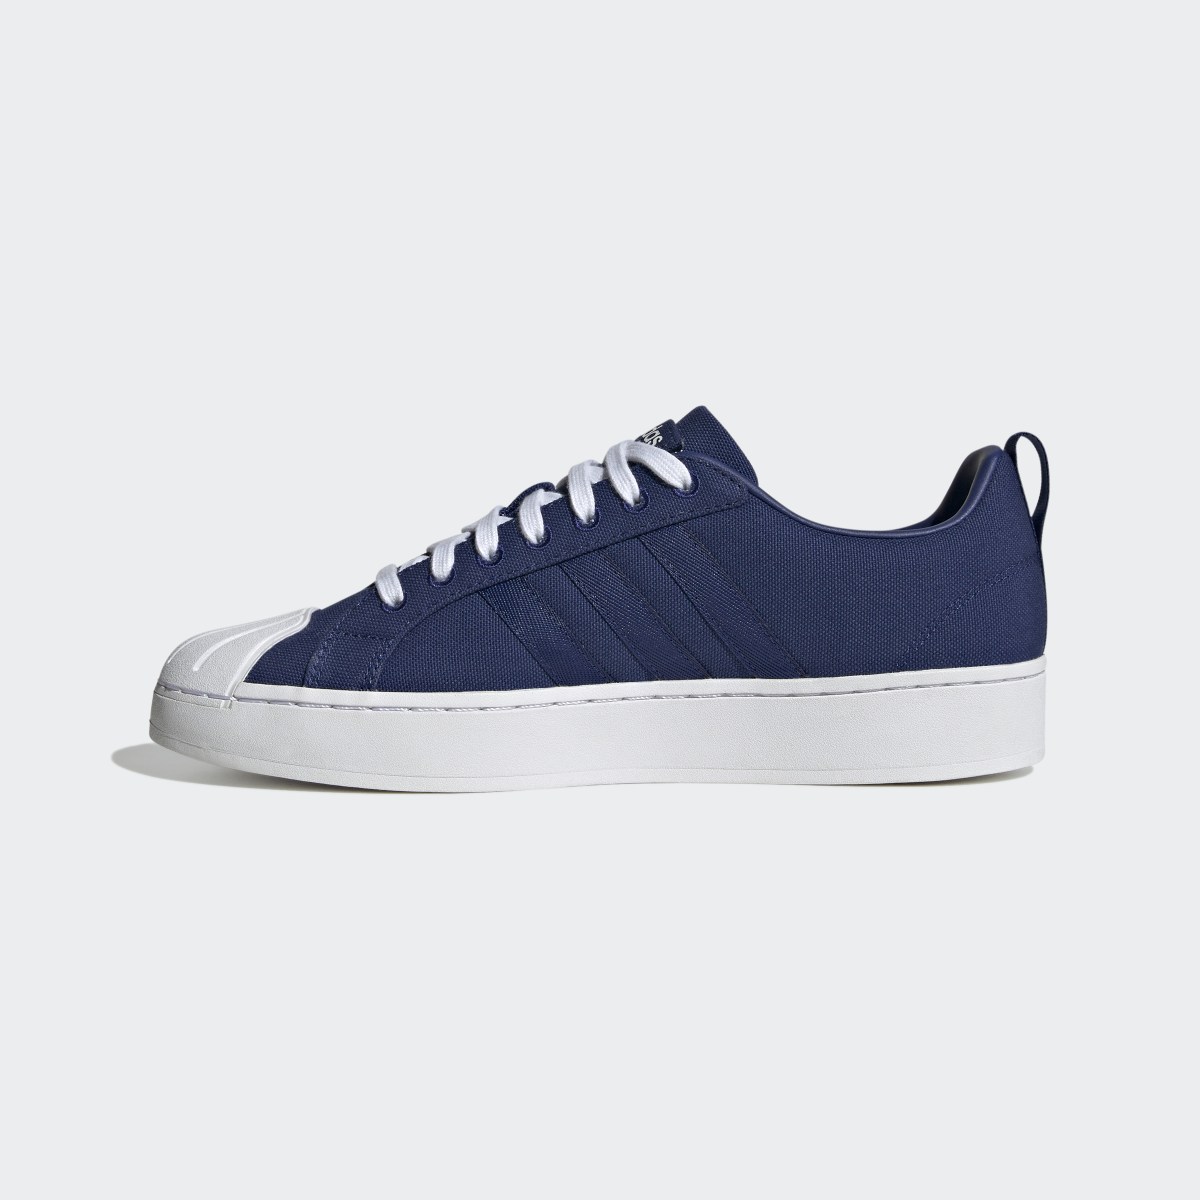 Adidas Streetcheck Cloudfoam Lifestyle Low Court Shoes. 7